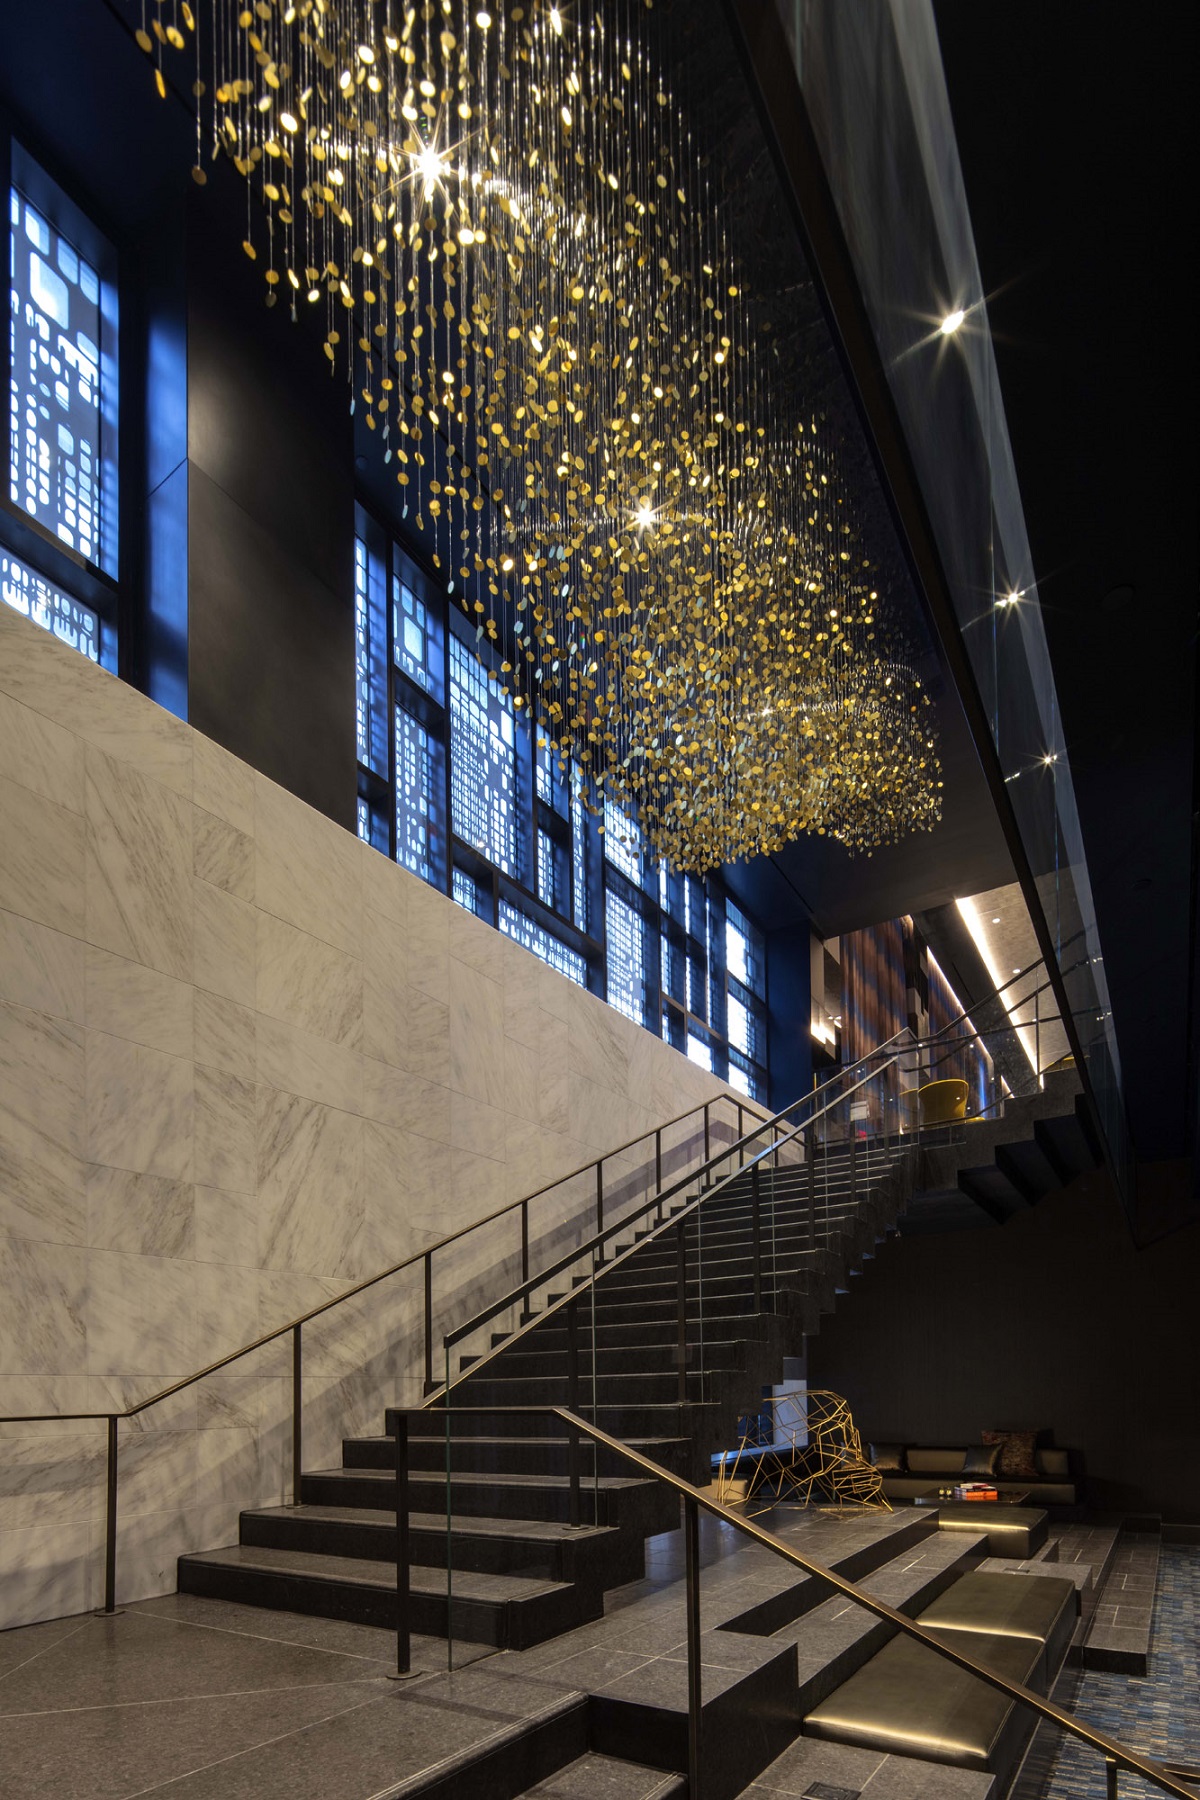 Dramatic golden lights in the public spaces of the W Philadelphia